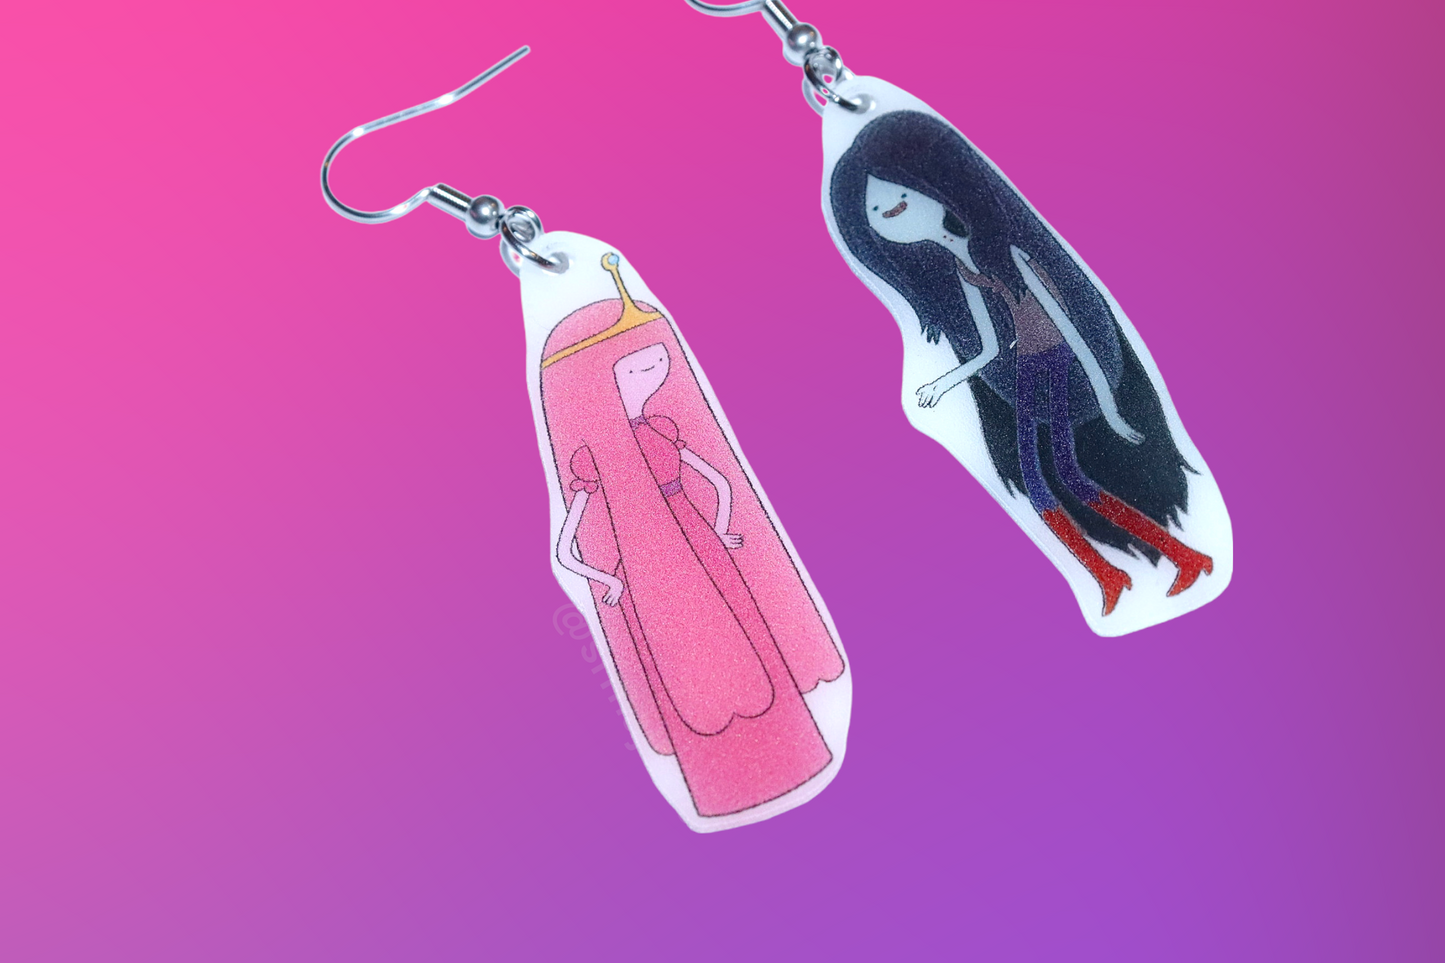 (READY TO SHIP) Marceline and Princess Bubblegum from Adventure Time Character Handmade Earrings!